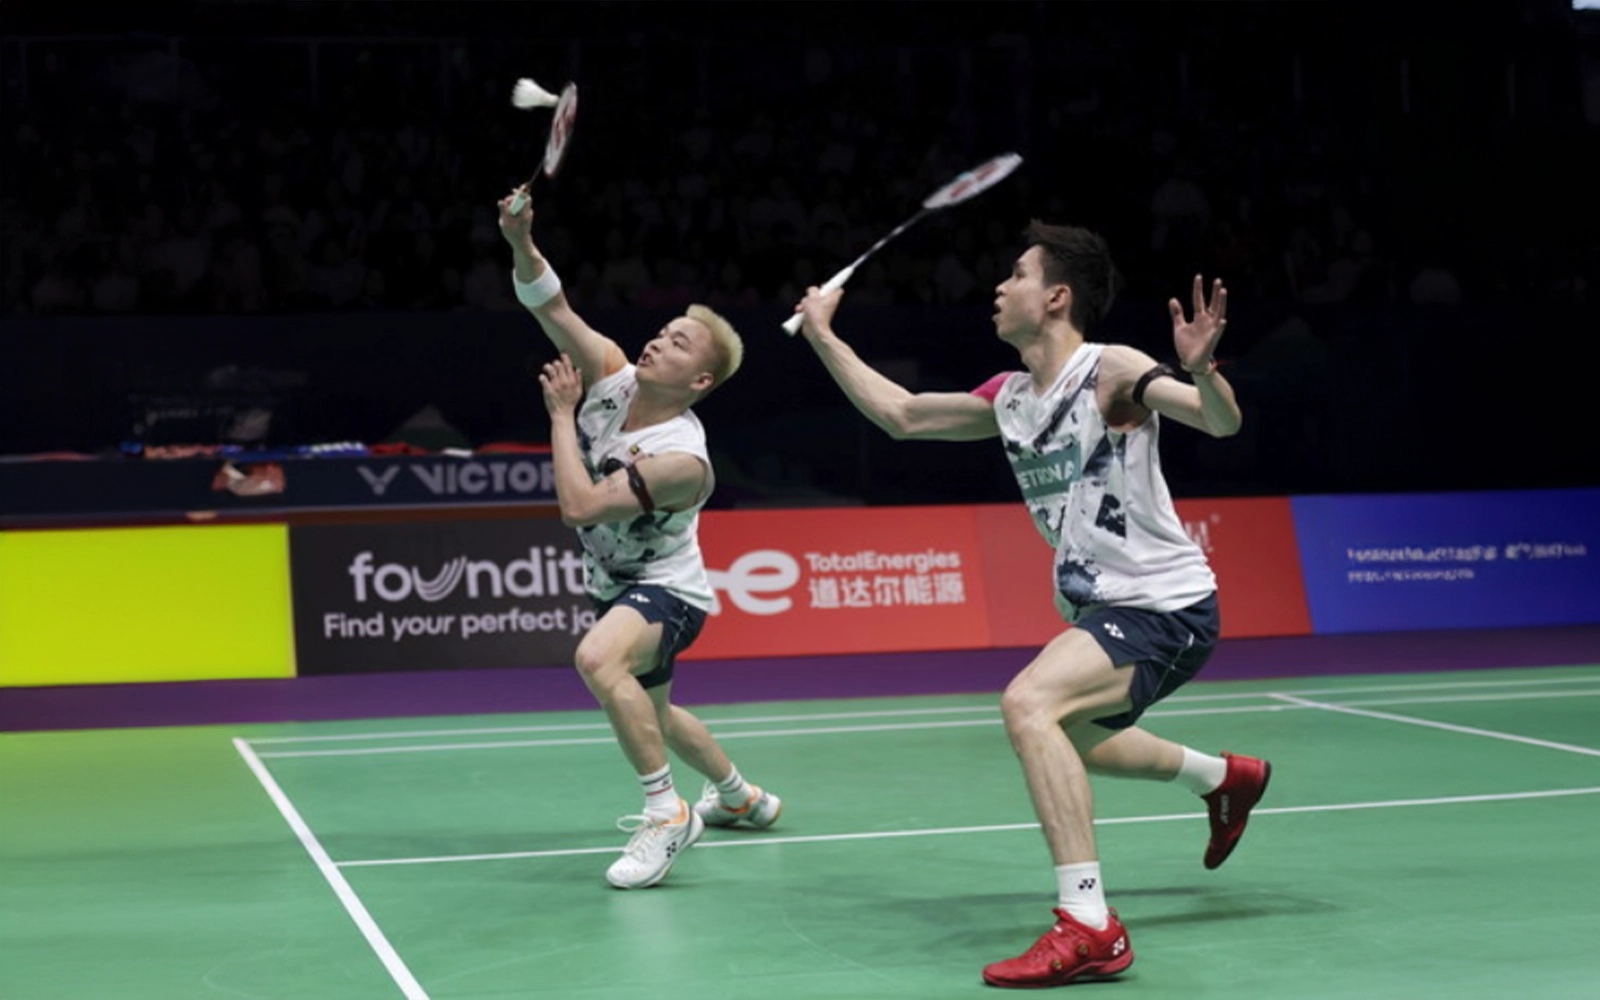 aaron-wooi yik recover a point after zii jia’s exit